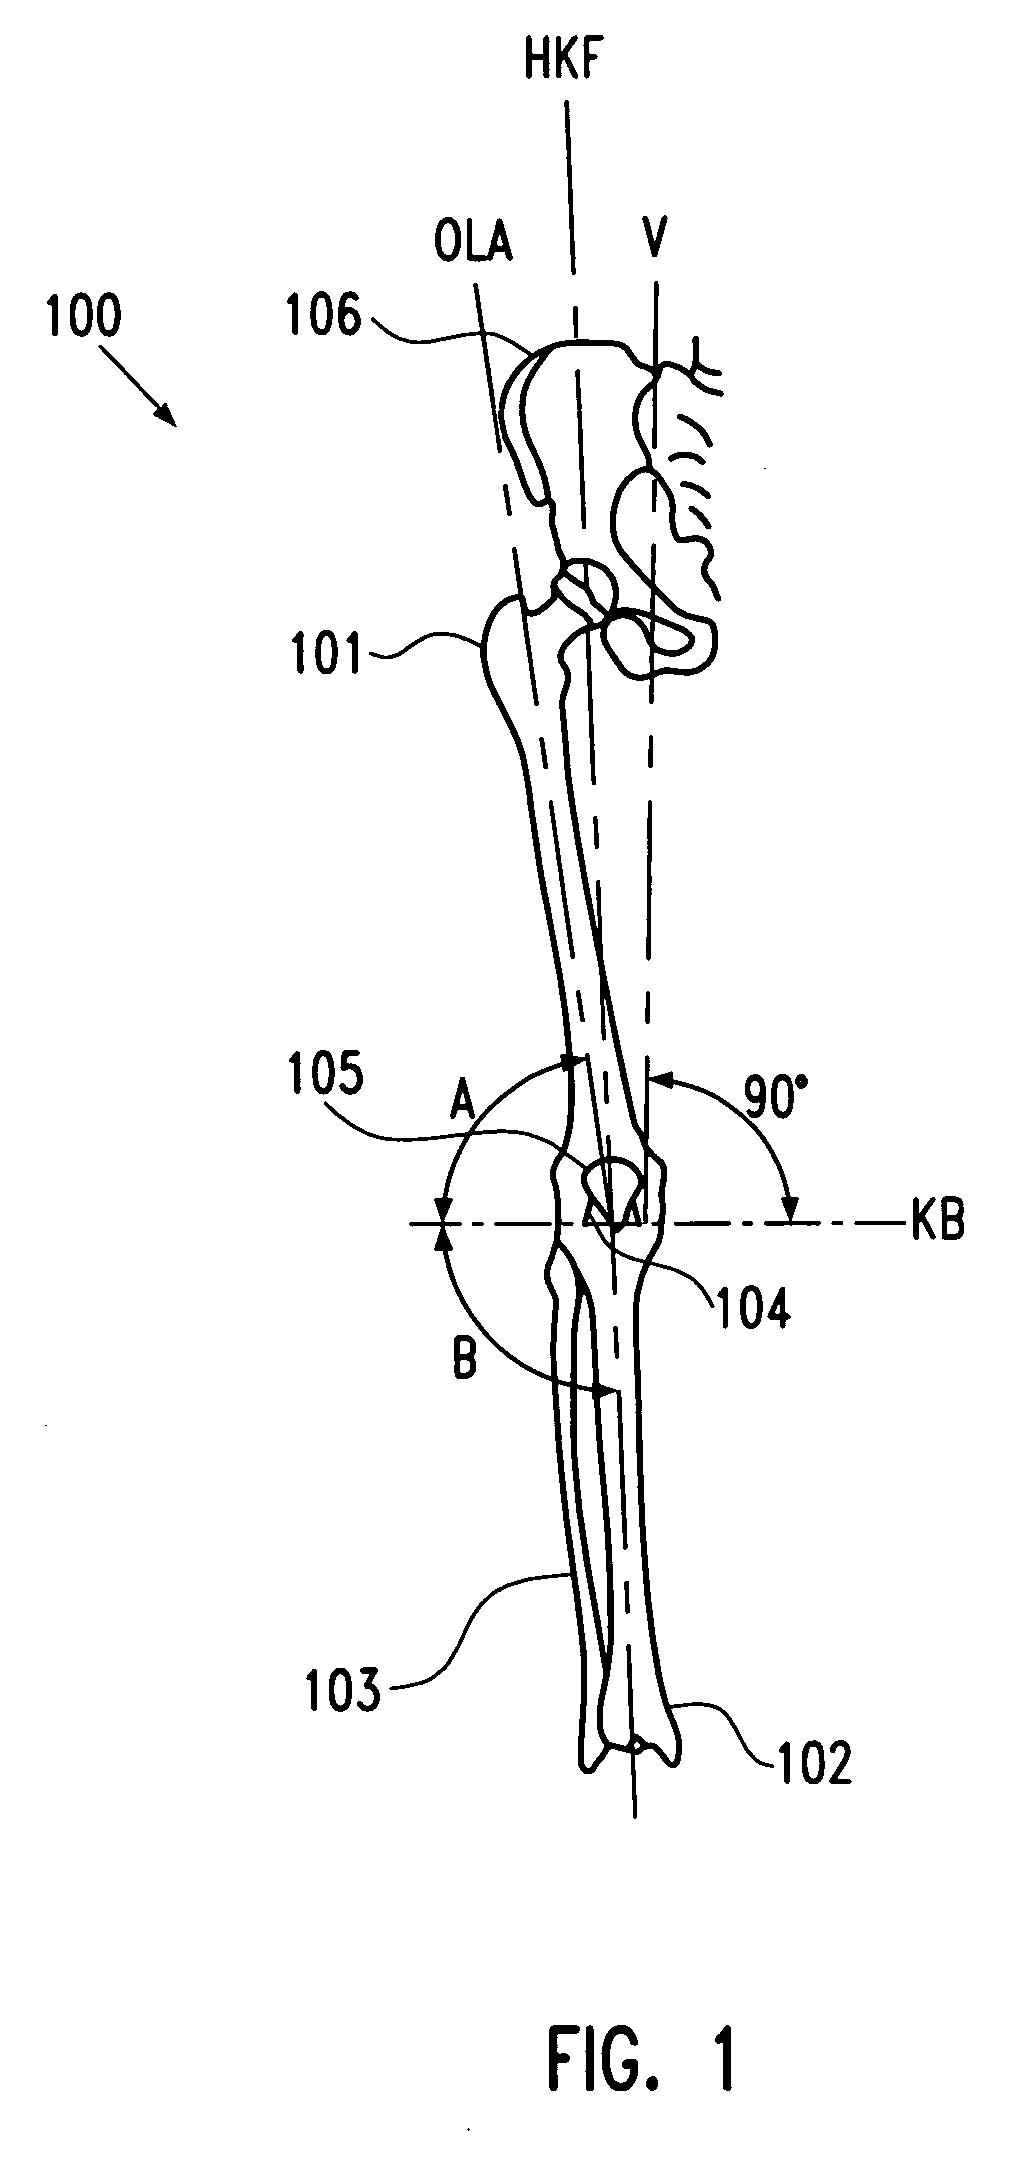 Arthrodesis module and method for providing a patient with an arthrodesis